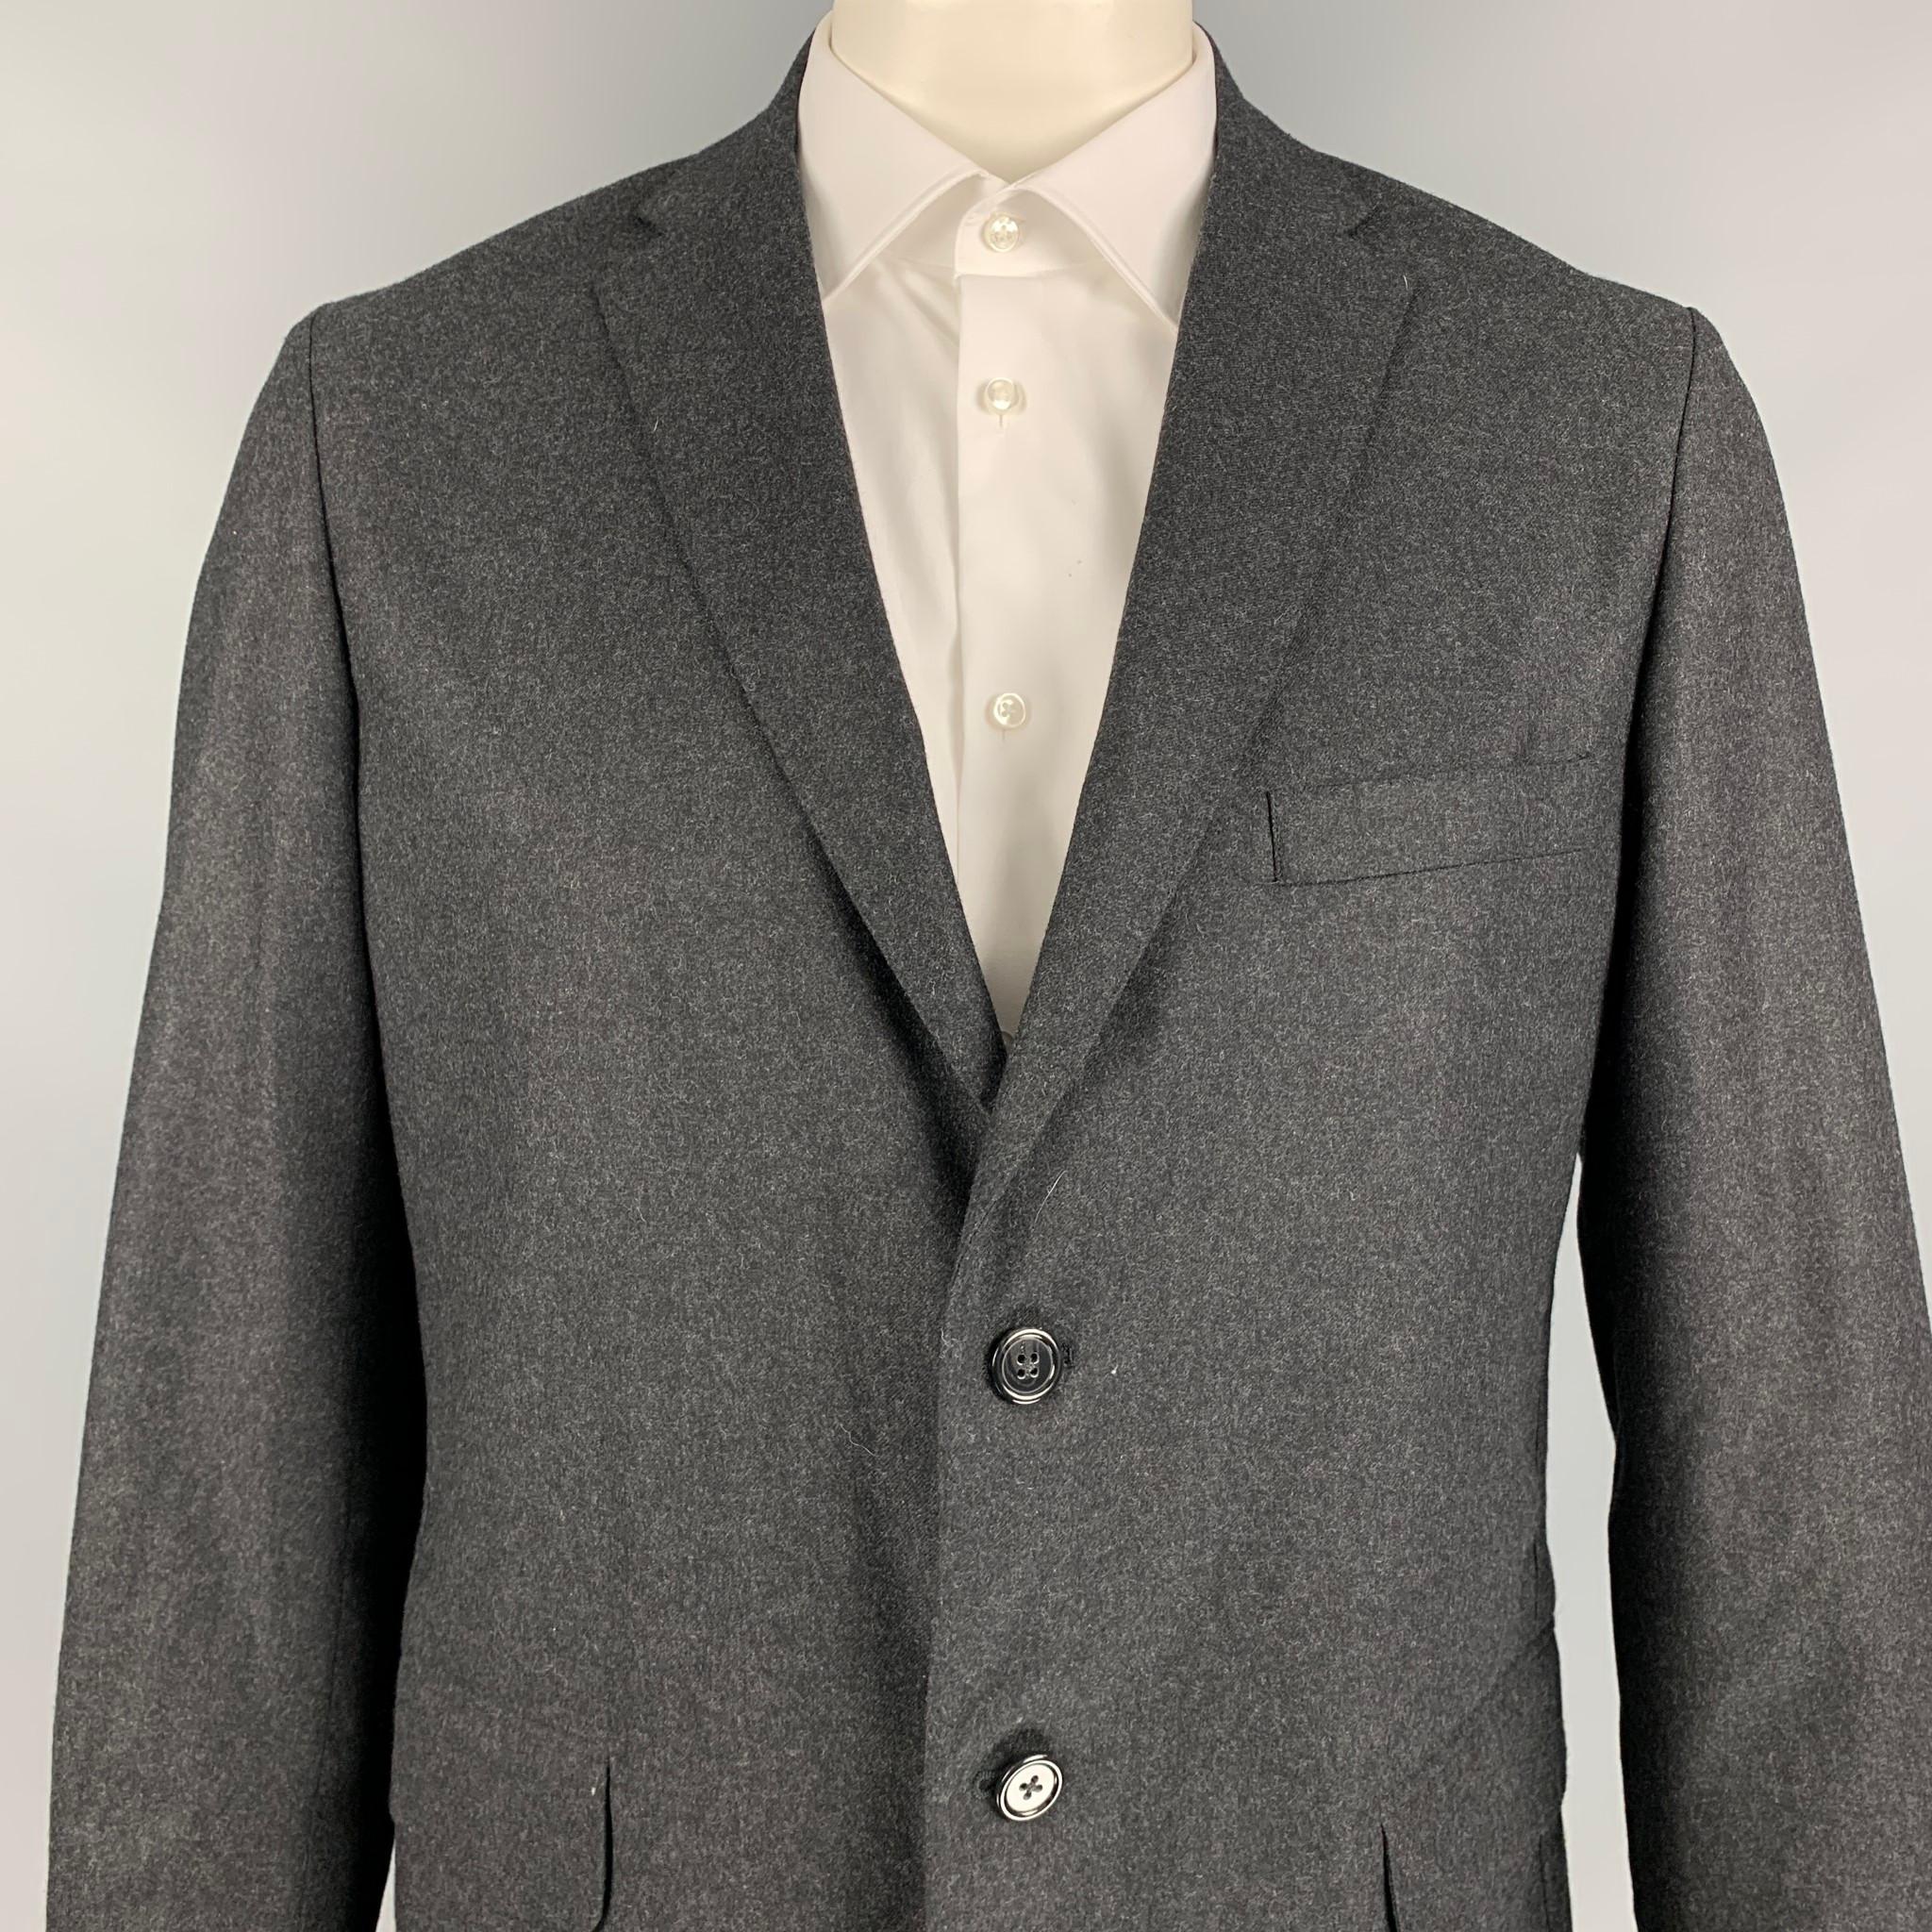 GITMAN BROS for UNIONMADE sport coat comes in a charcoal wool with a half liner featuring a notch lapel, flap pockets, double back vent, and a double button closure. Made in USA. 

New With Tags. 
Marked: 44
Original Retail Price: